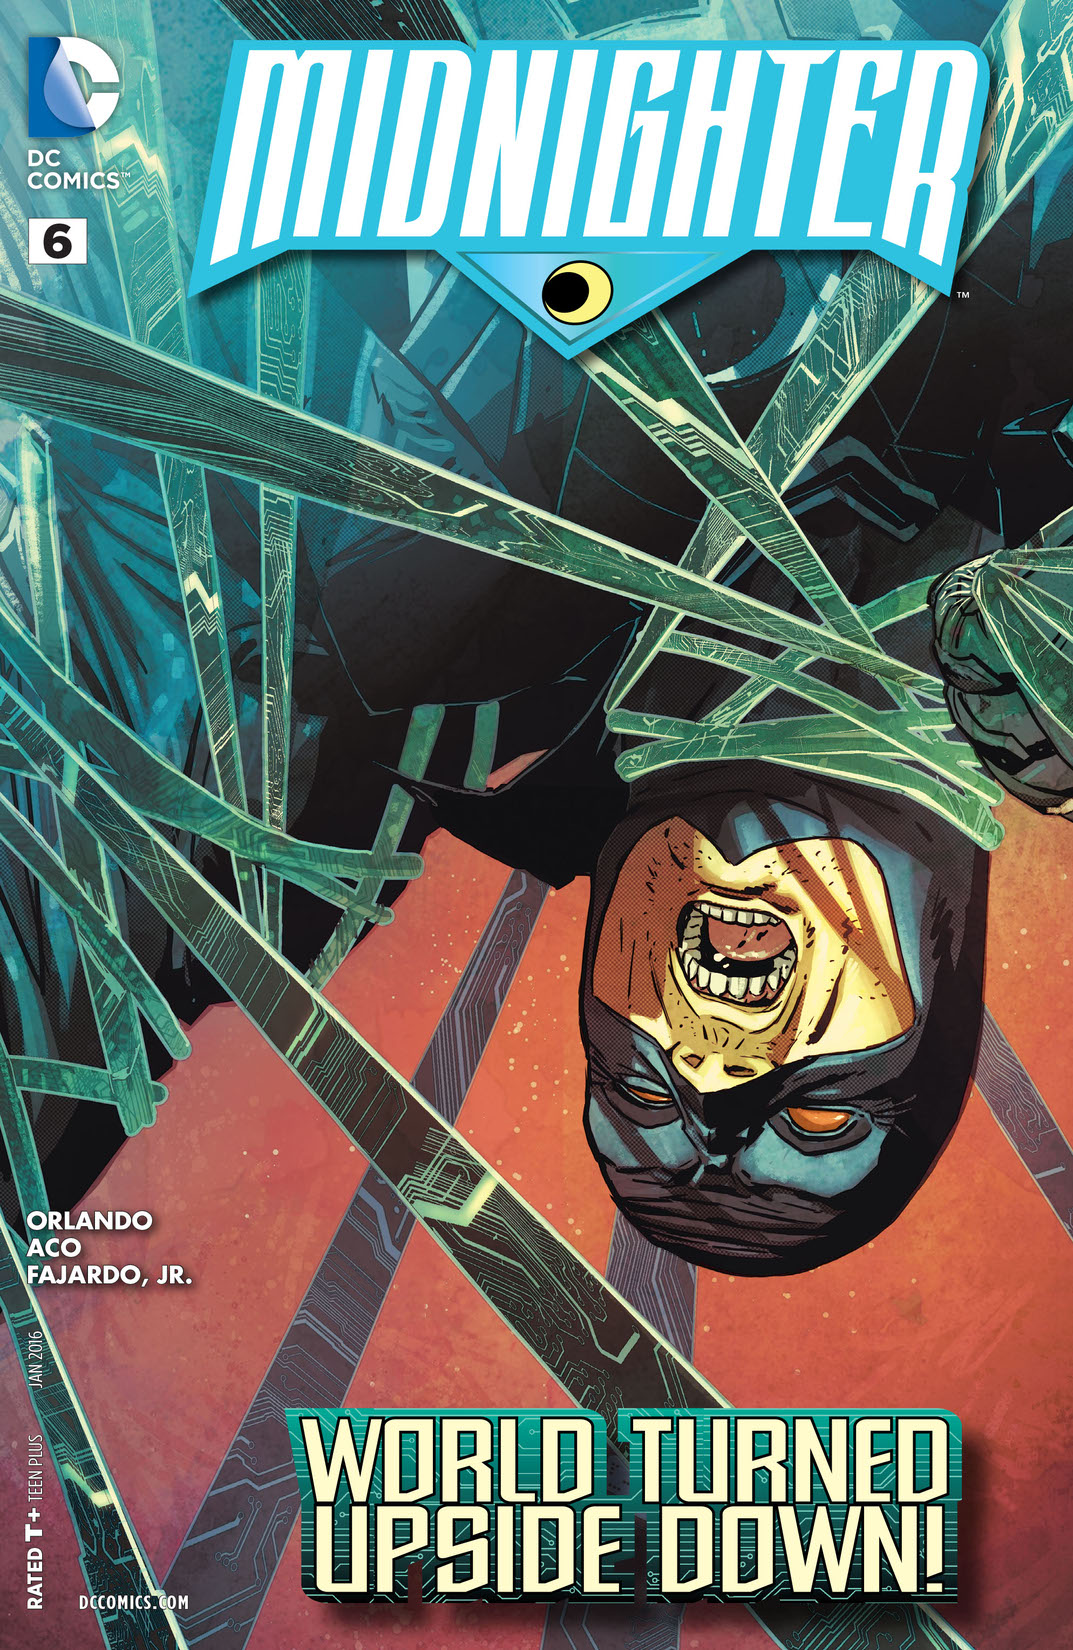 Midnighter (2015-) #6 preview images